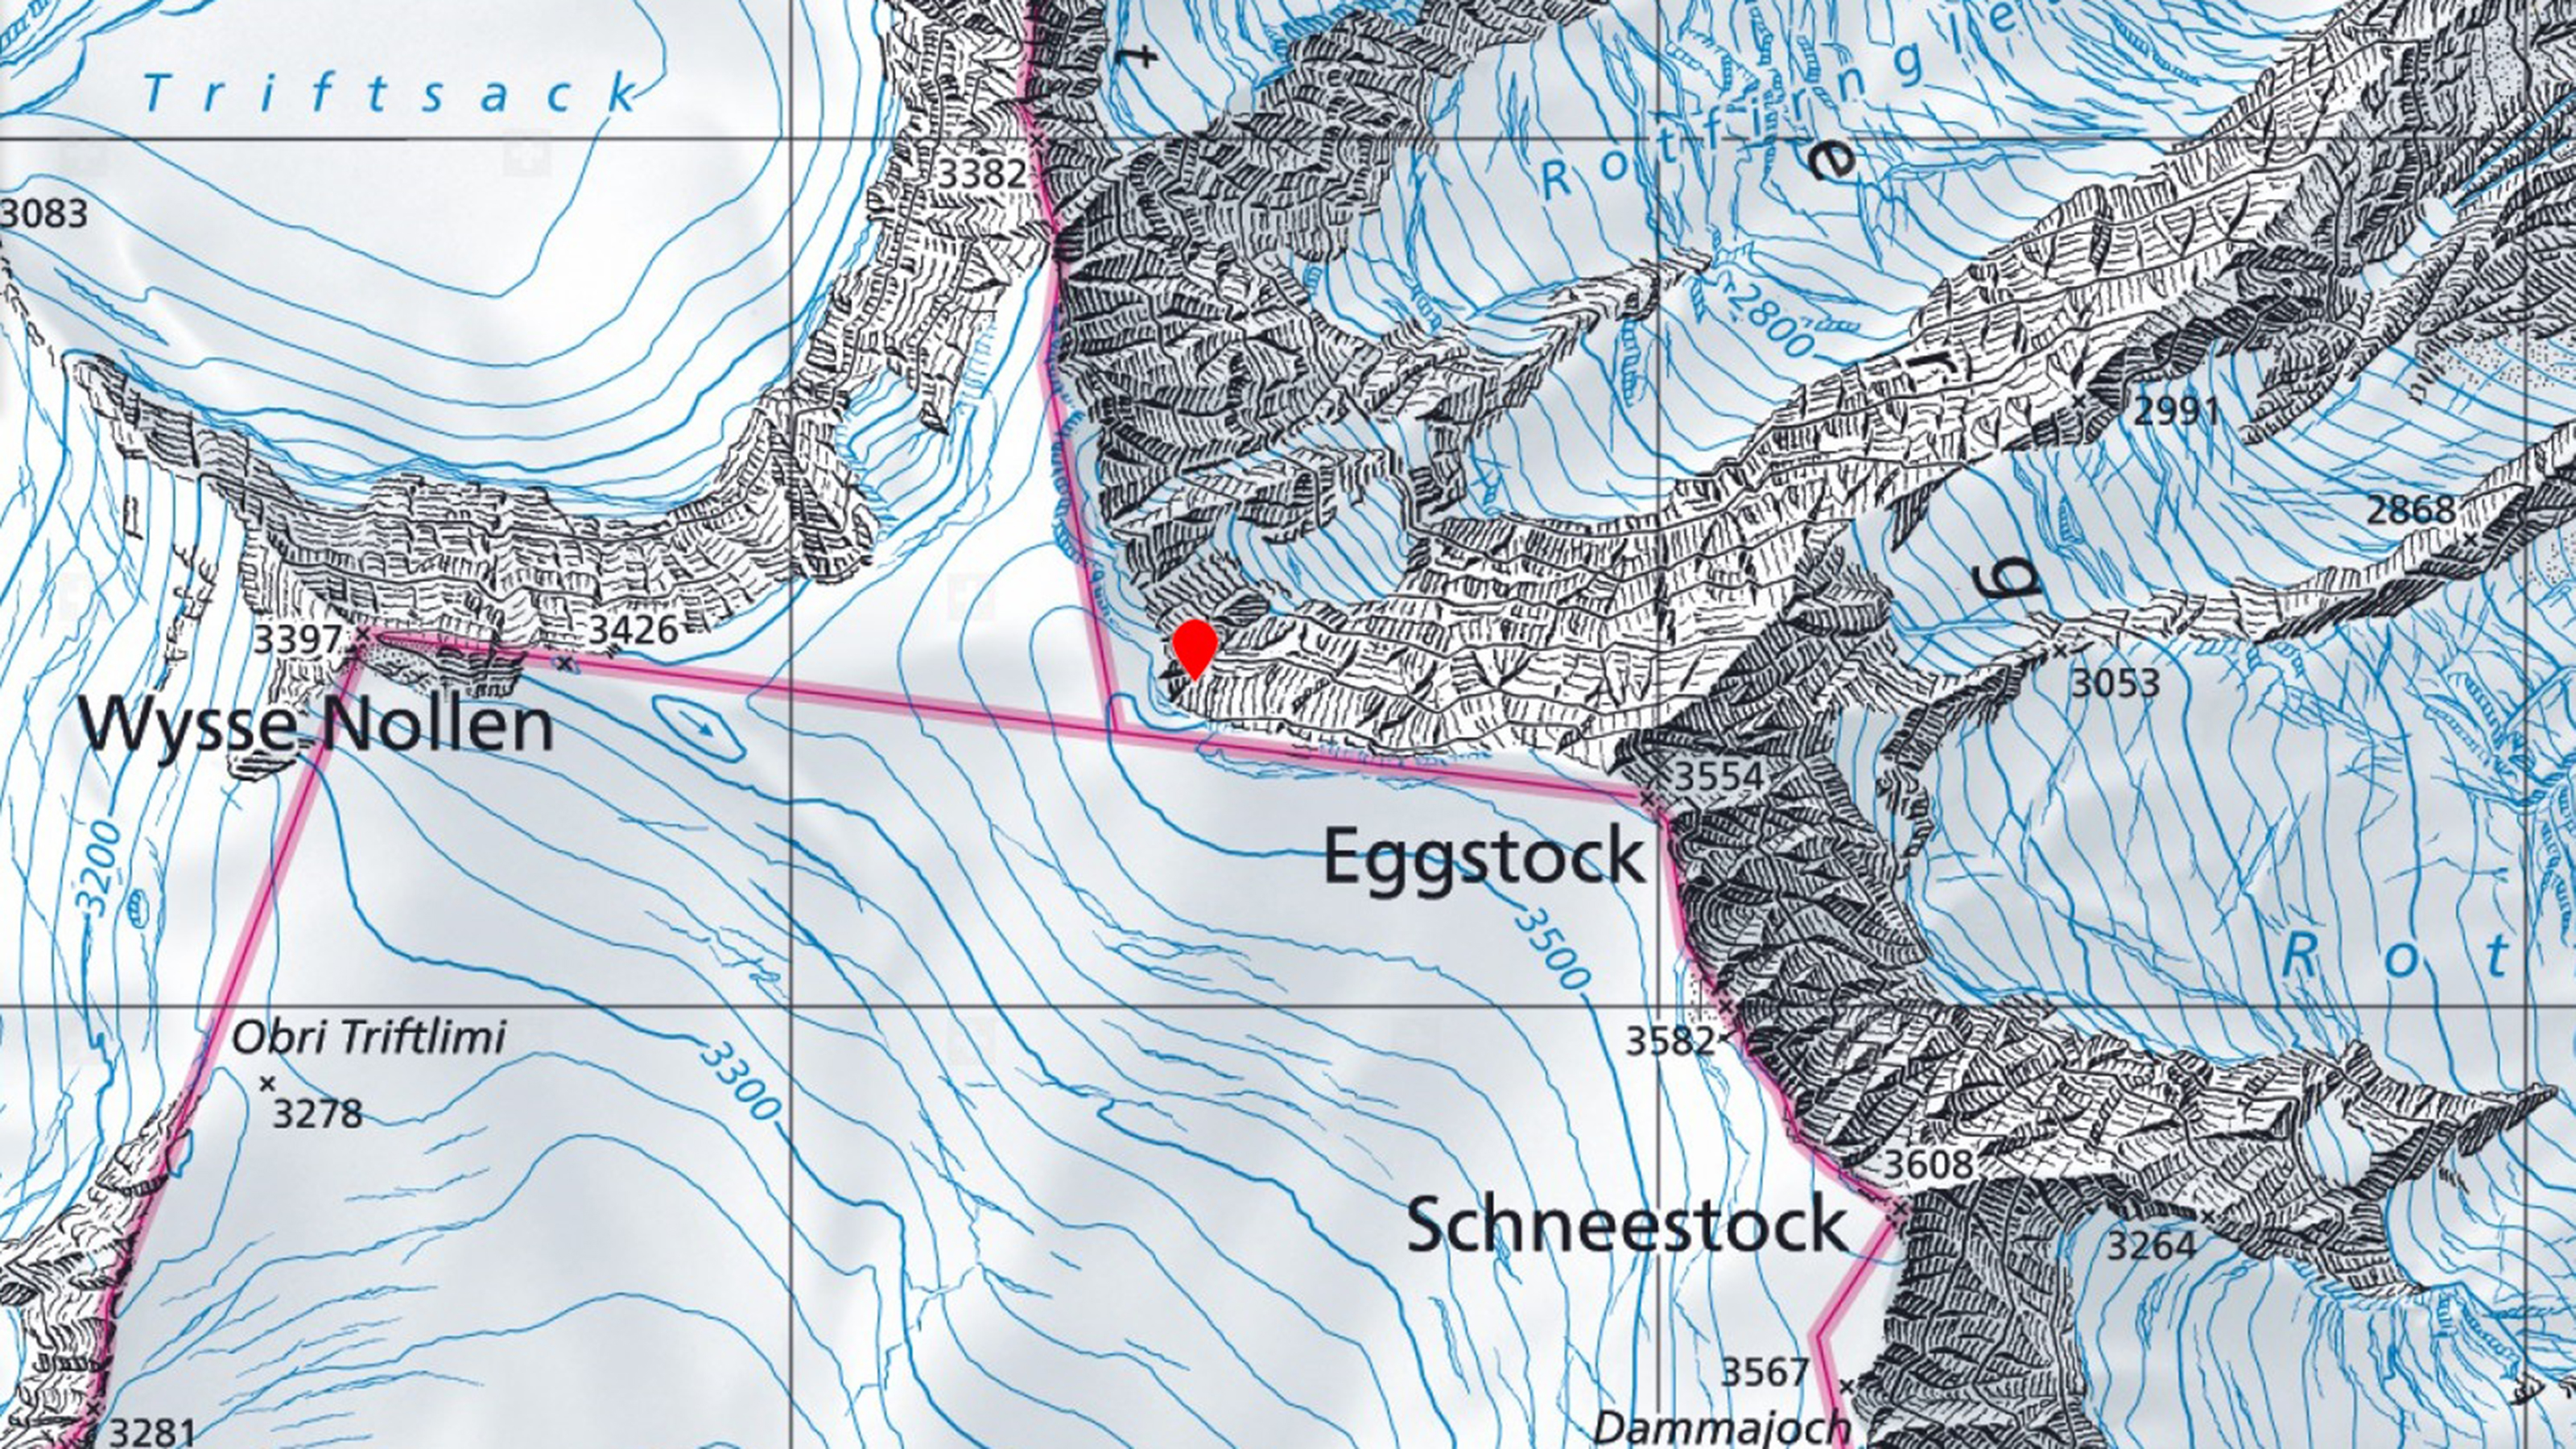 Volumetric centre of Switzerland, marked on the national map.